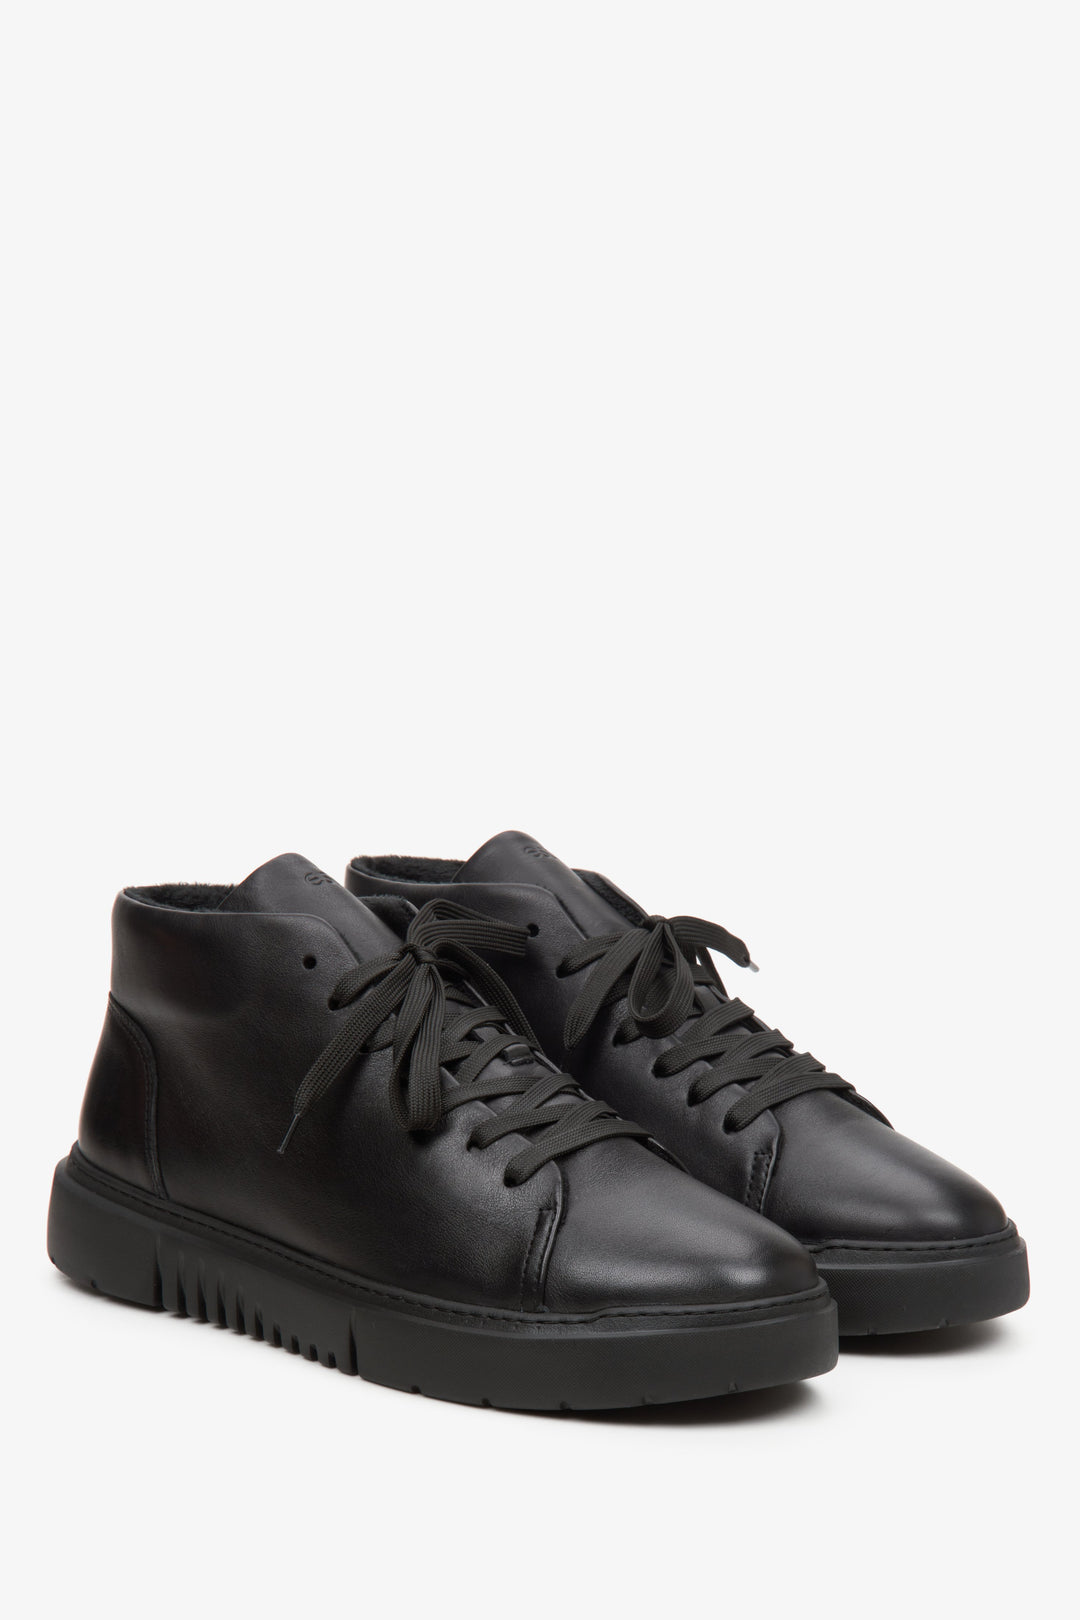 Black, leather, high-top Estro men's sneakers - close-up on the toe and side seam.